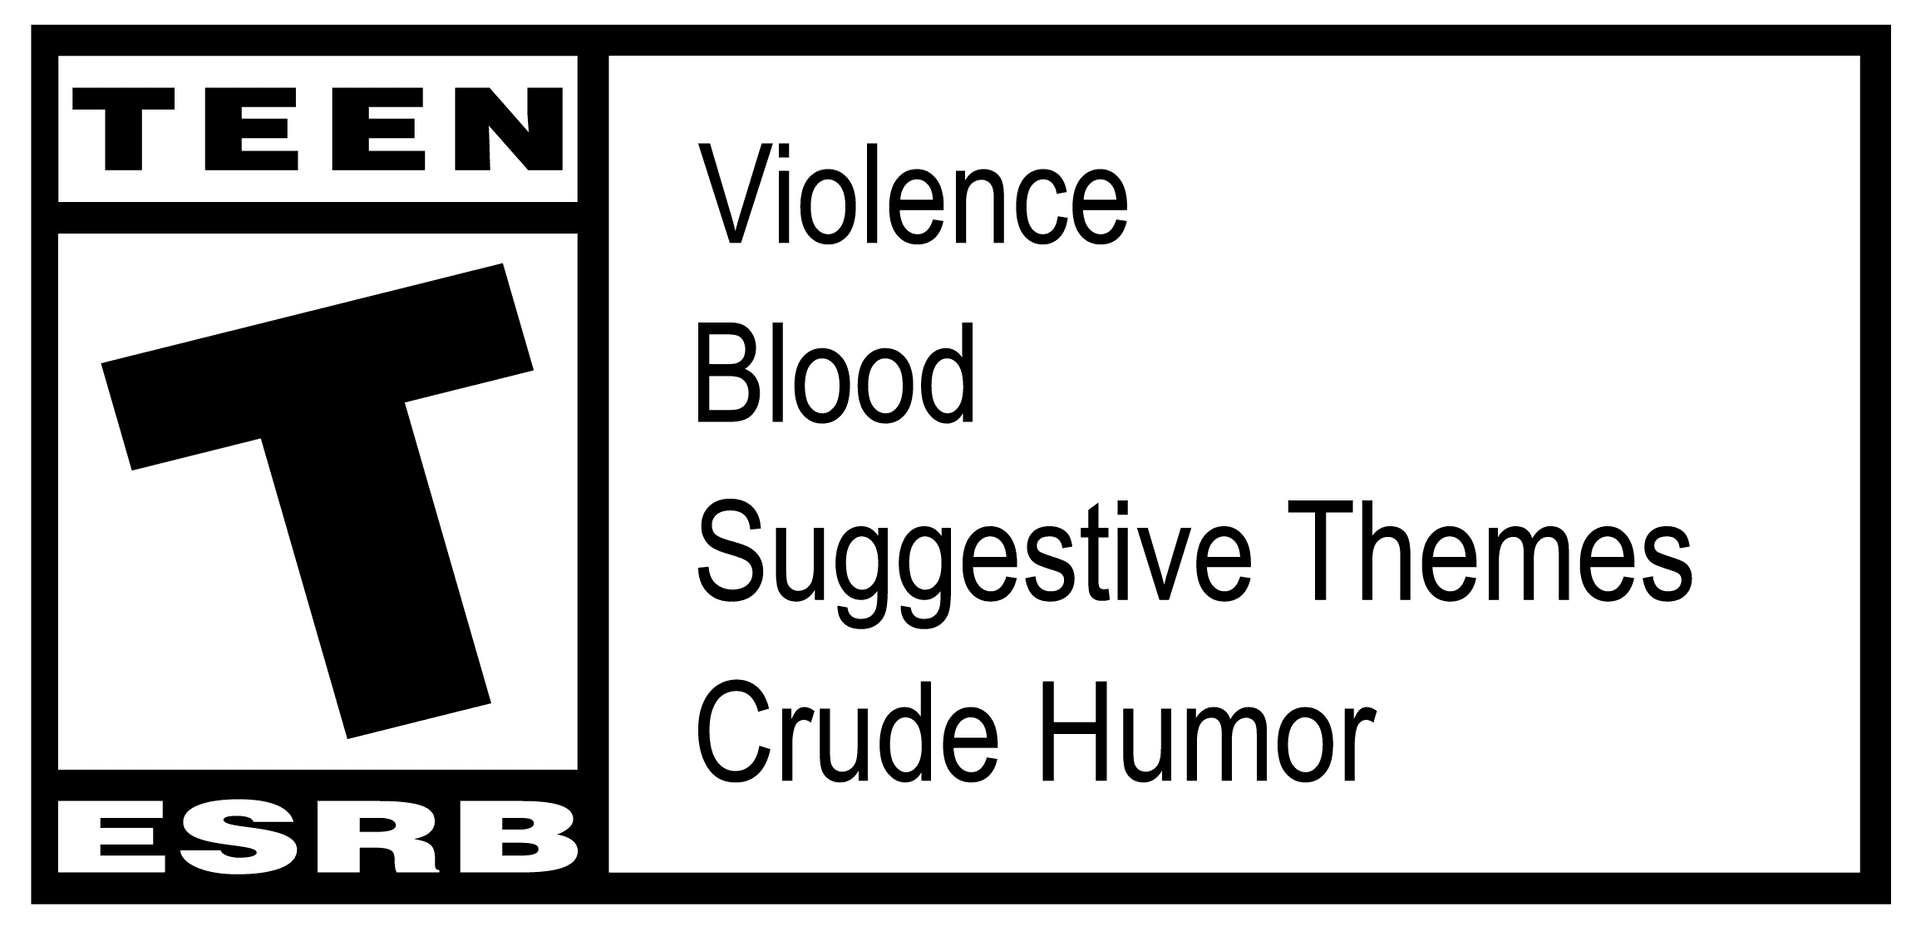 Rating pending - May contain content inappropriate for children. Visit esrb.org for rating information.